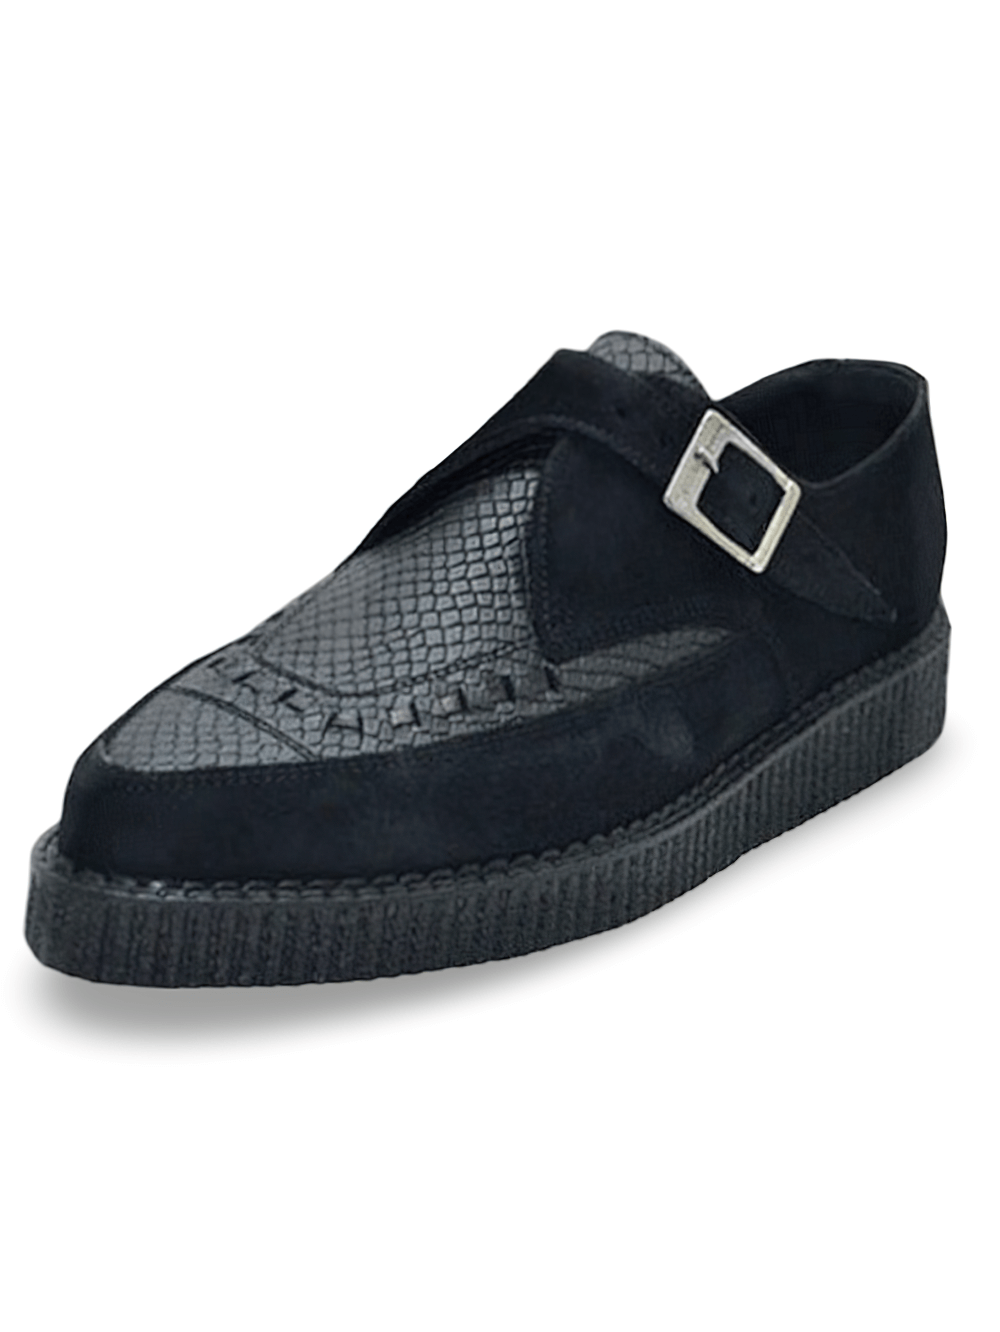 Black Pointy Creepers with Snake And Suede Finish